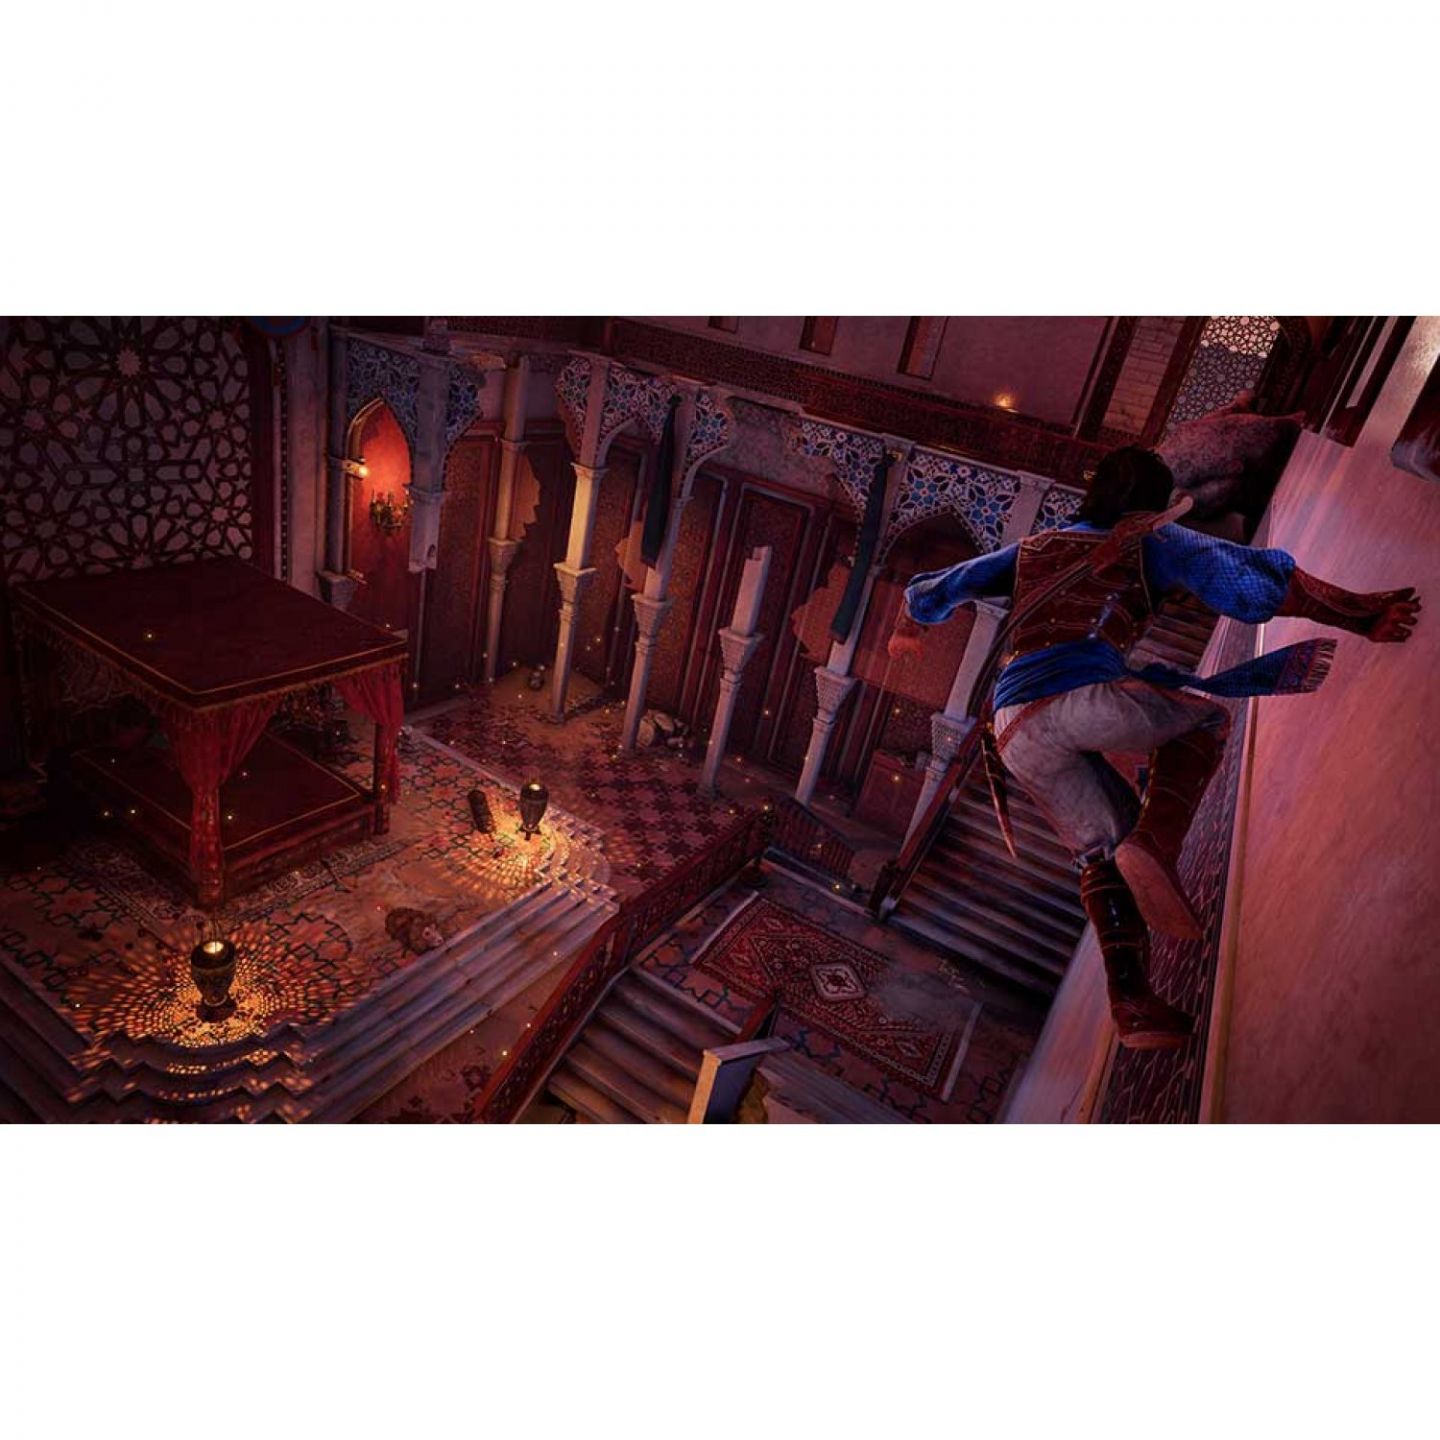 Buy PlayStation 4 Prince of Persia: The Sands of Time Remake, prince persia  game 